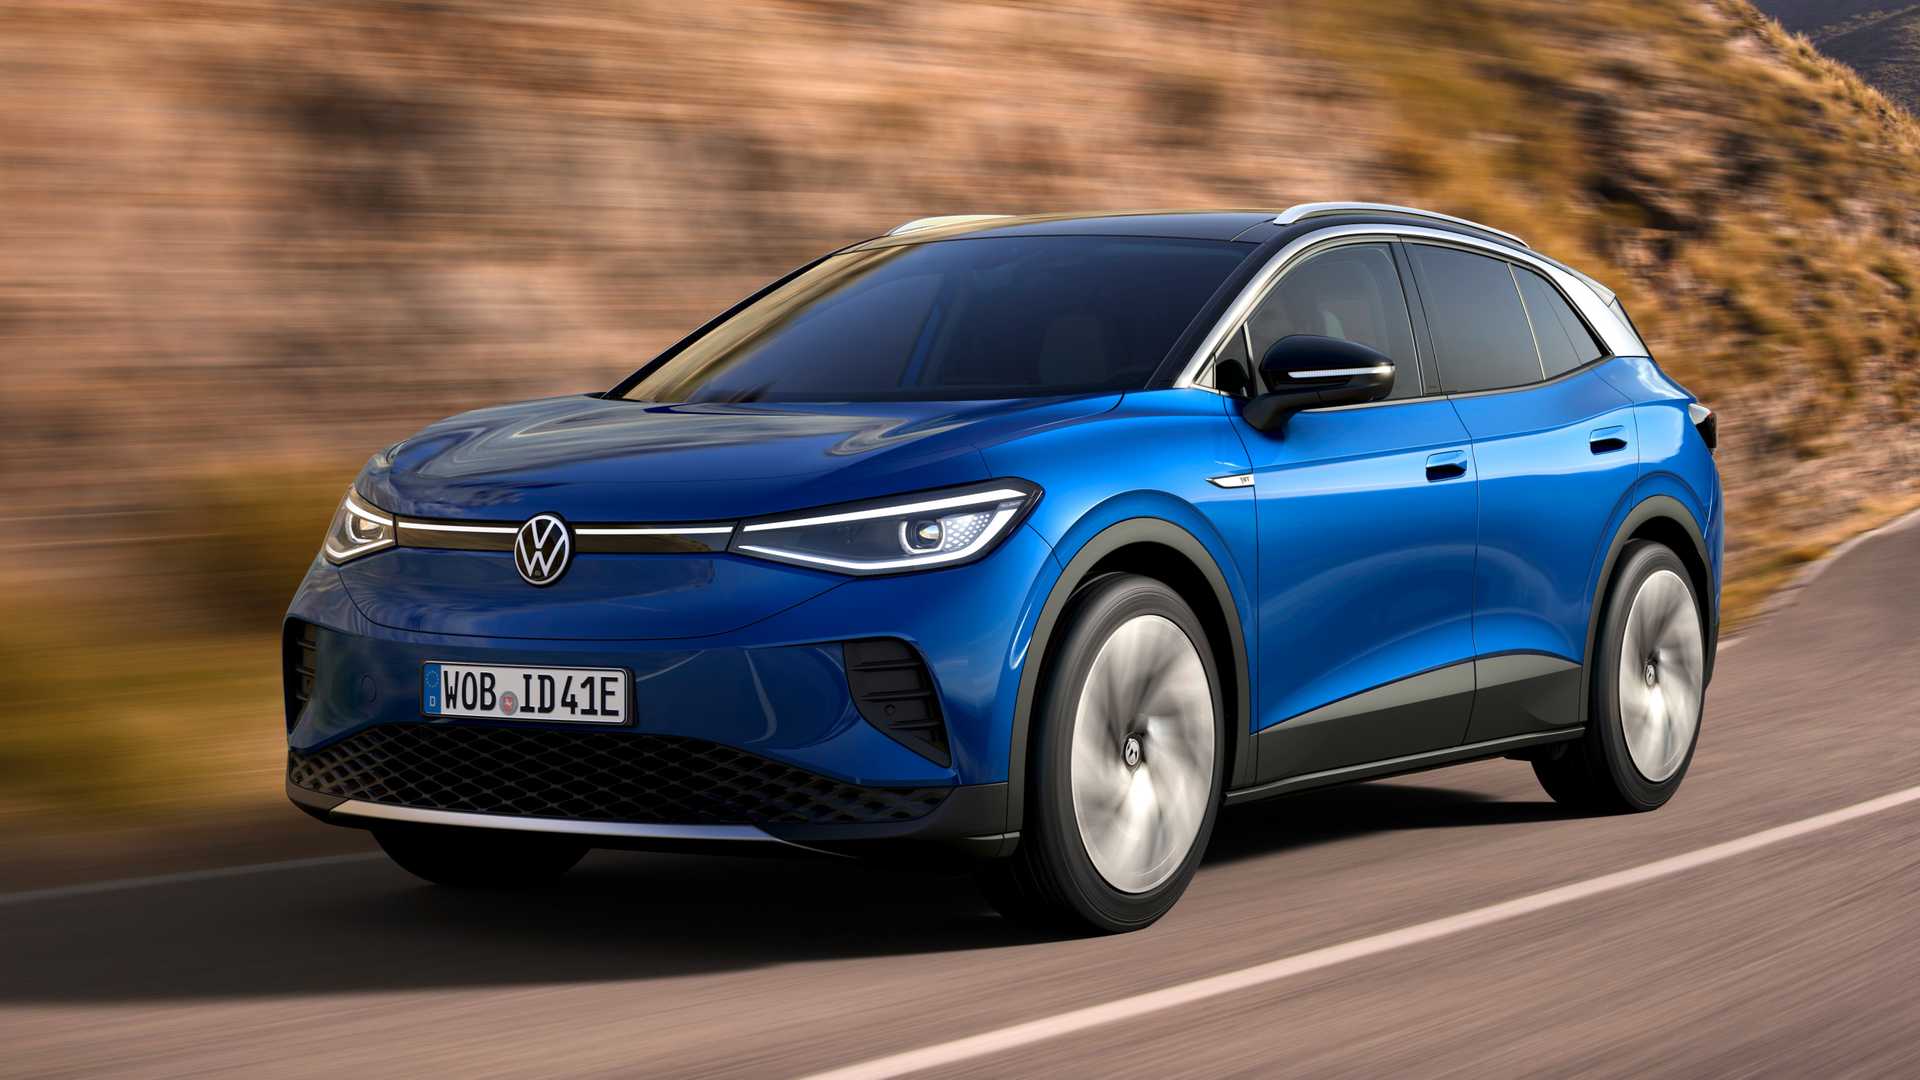 2021 Volkswagen ID.4 Prototype First Drive Review: Just Plain Good